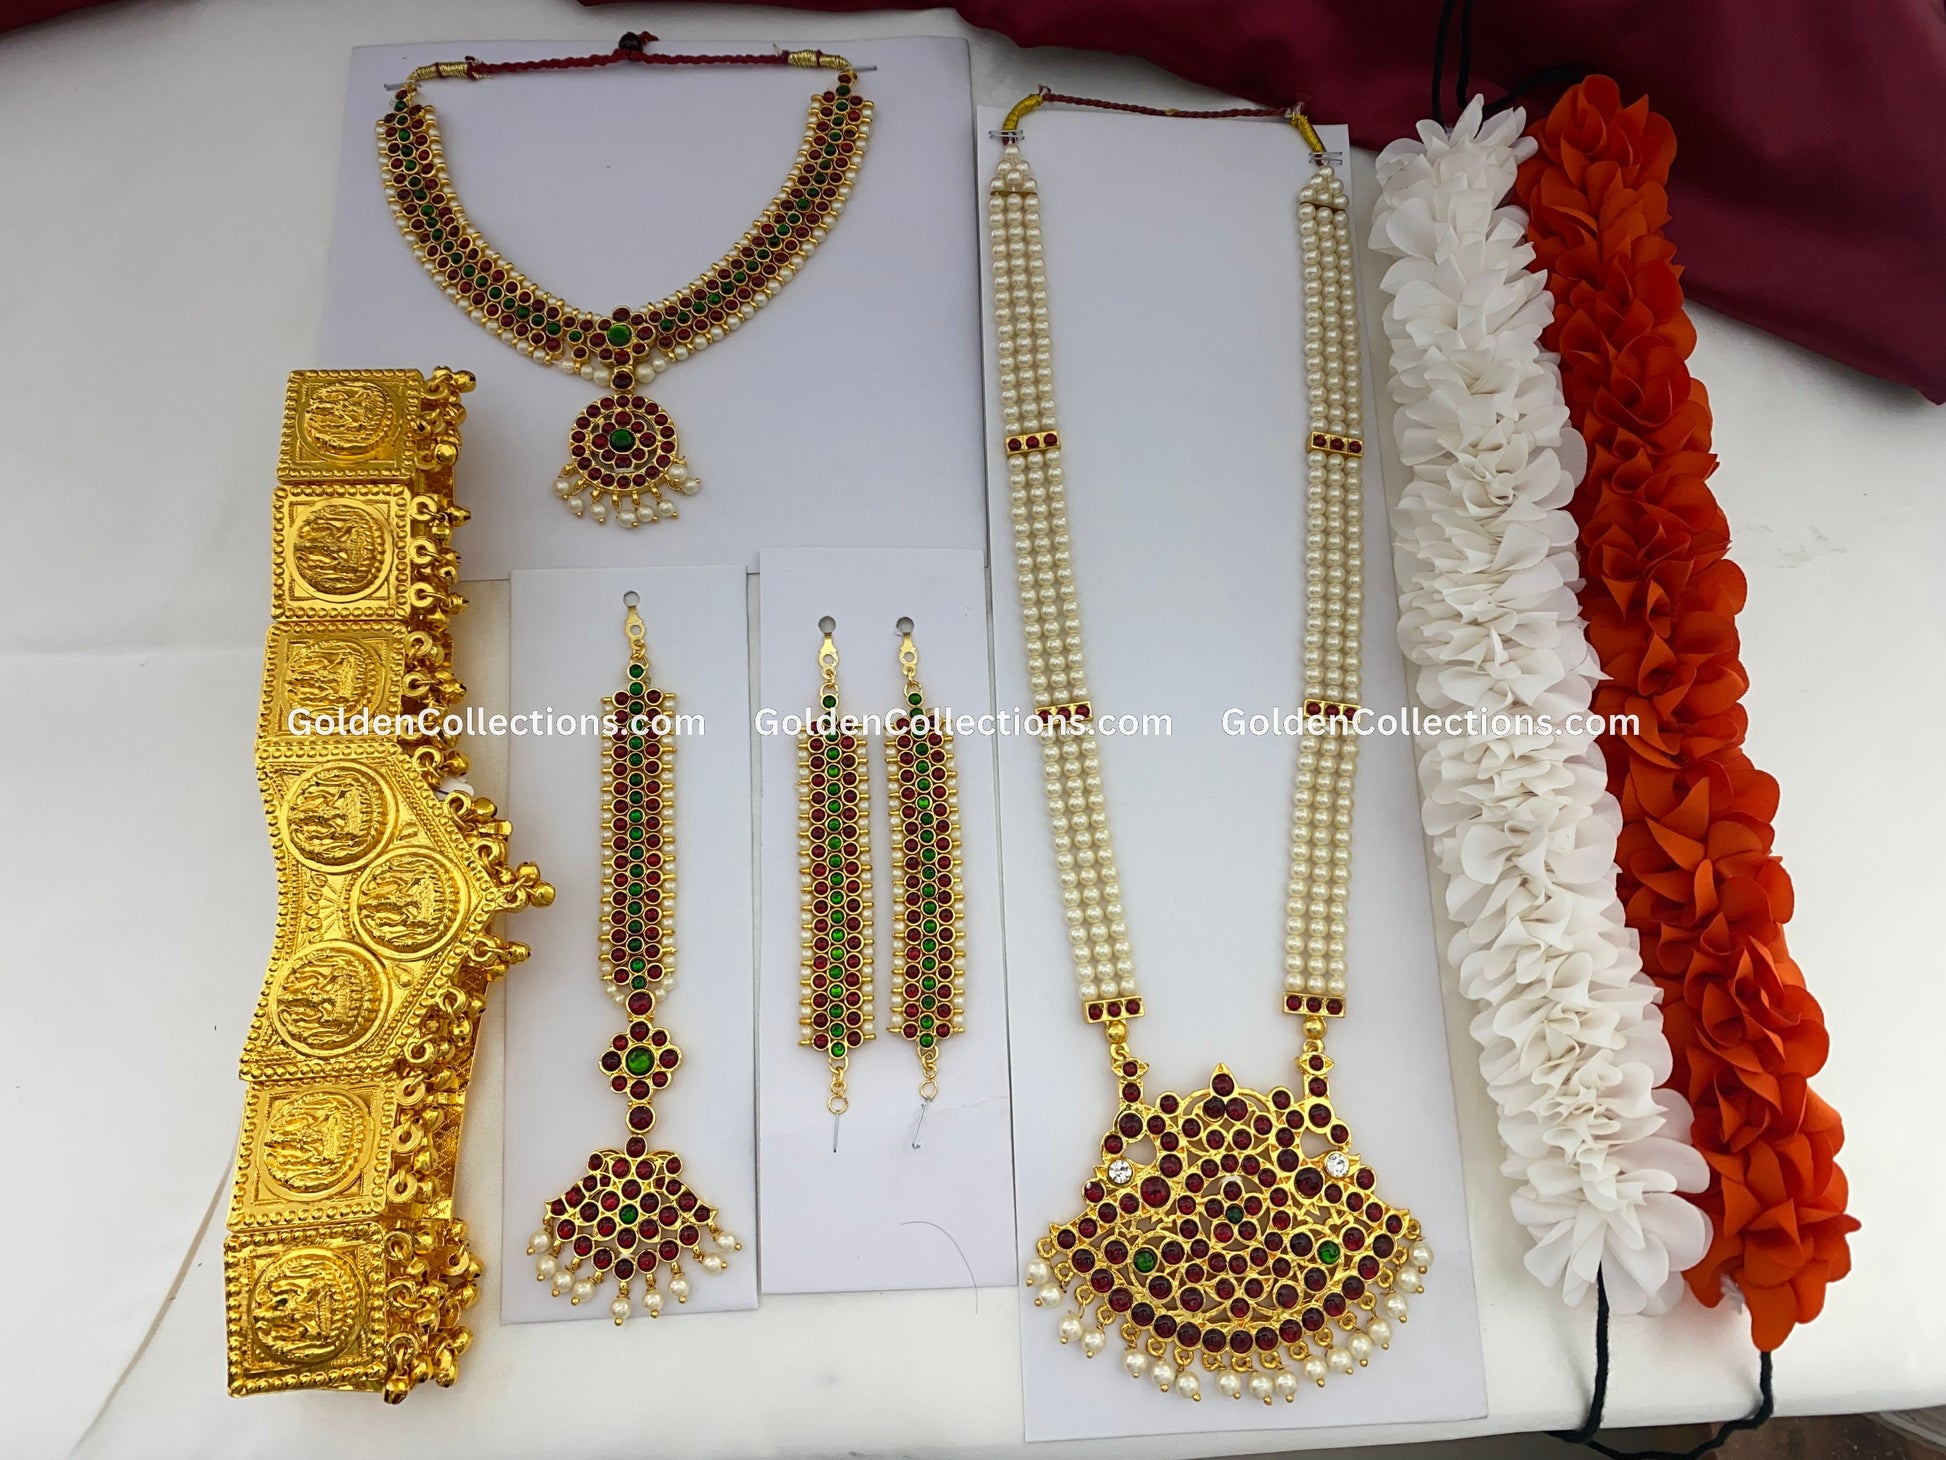 Bharatanatyam Classical Dance Jewelry Set GoldenCollections BDS-017 2